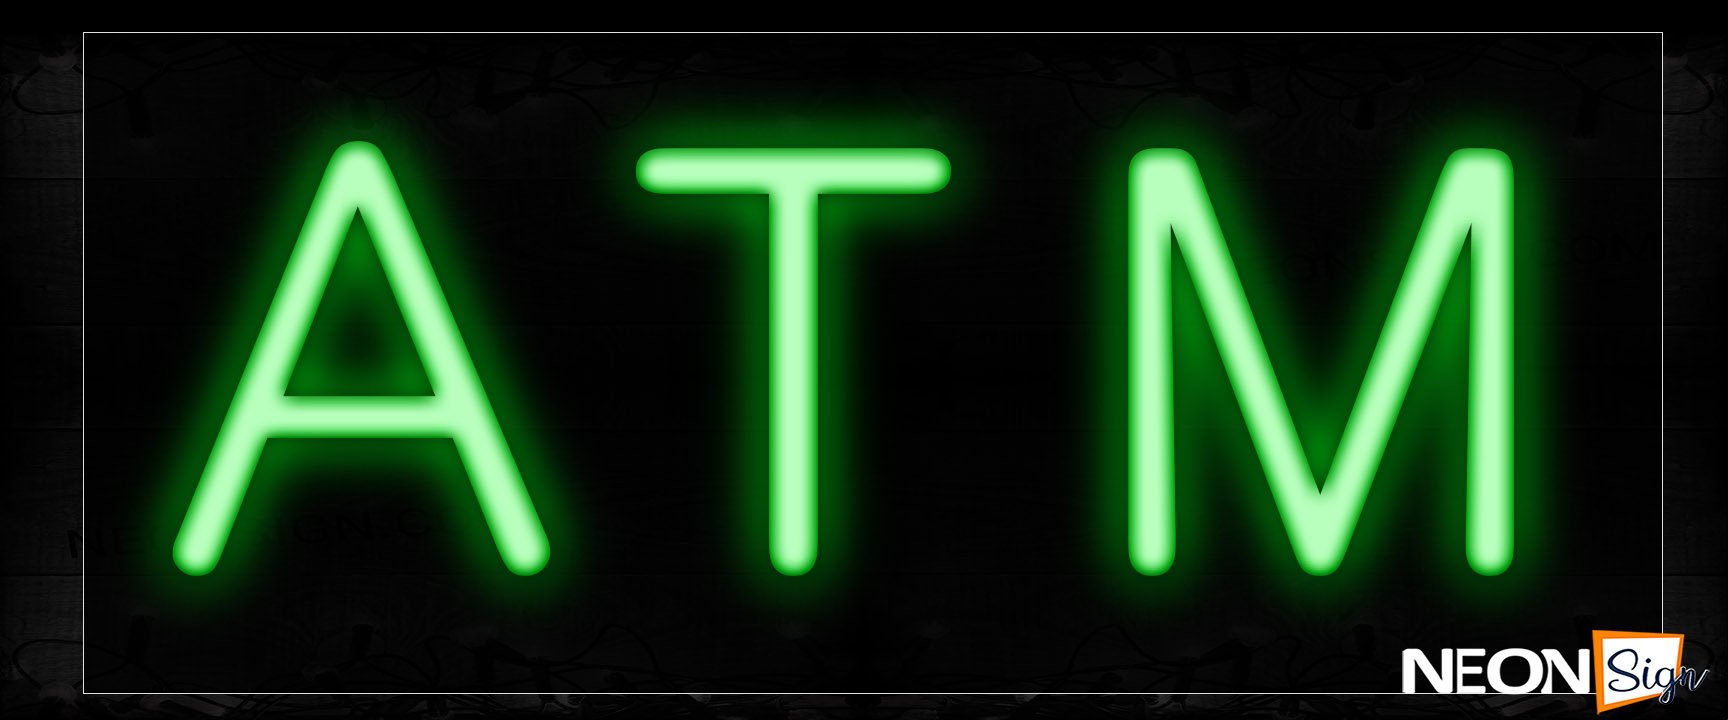 Image of 12327 Atm In Green Neon Signs_10x24 Black Backing